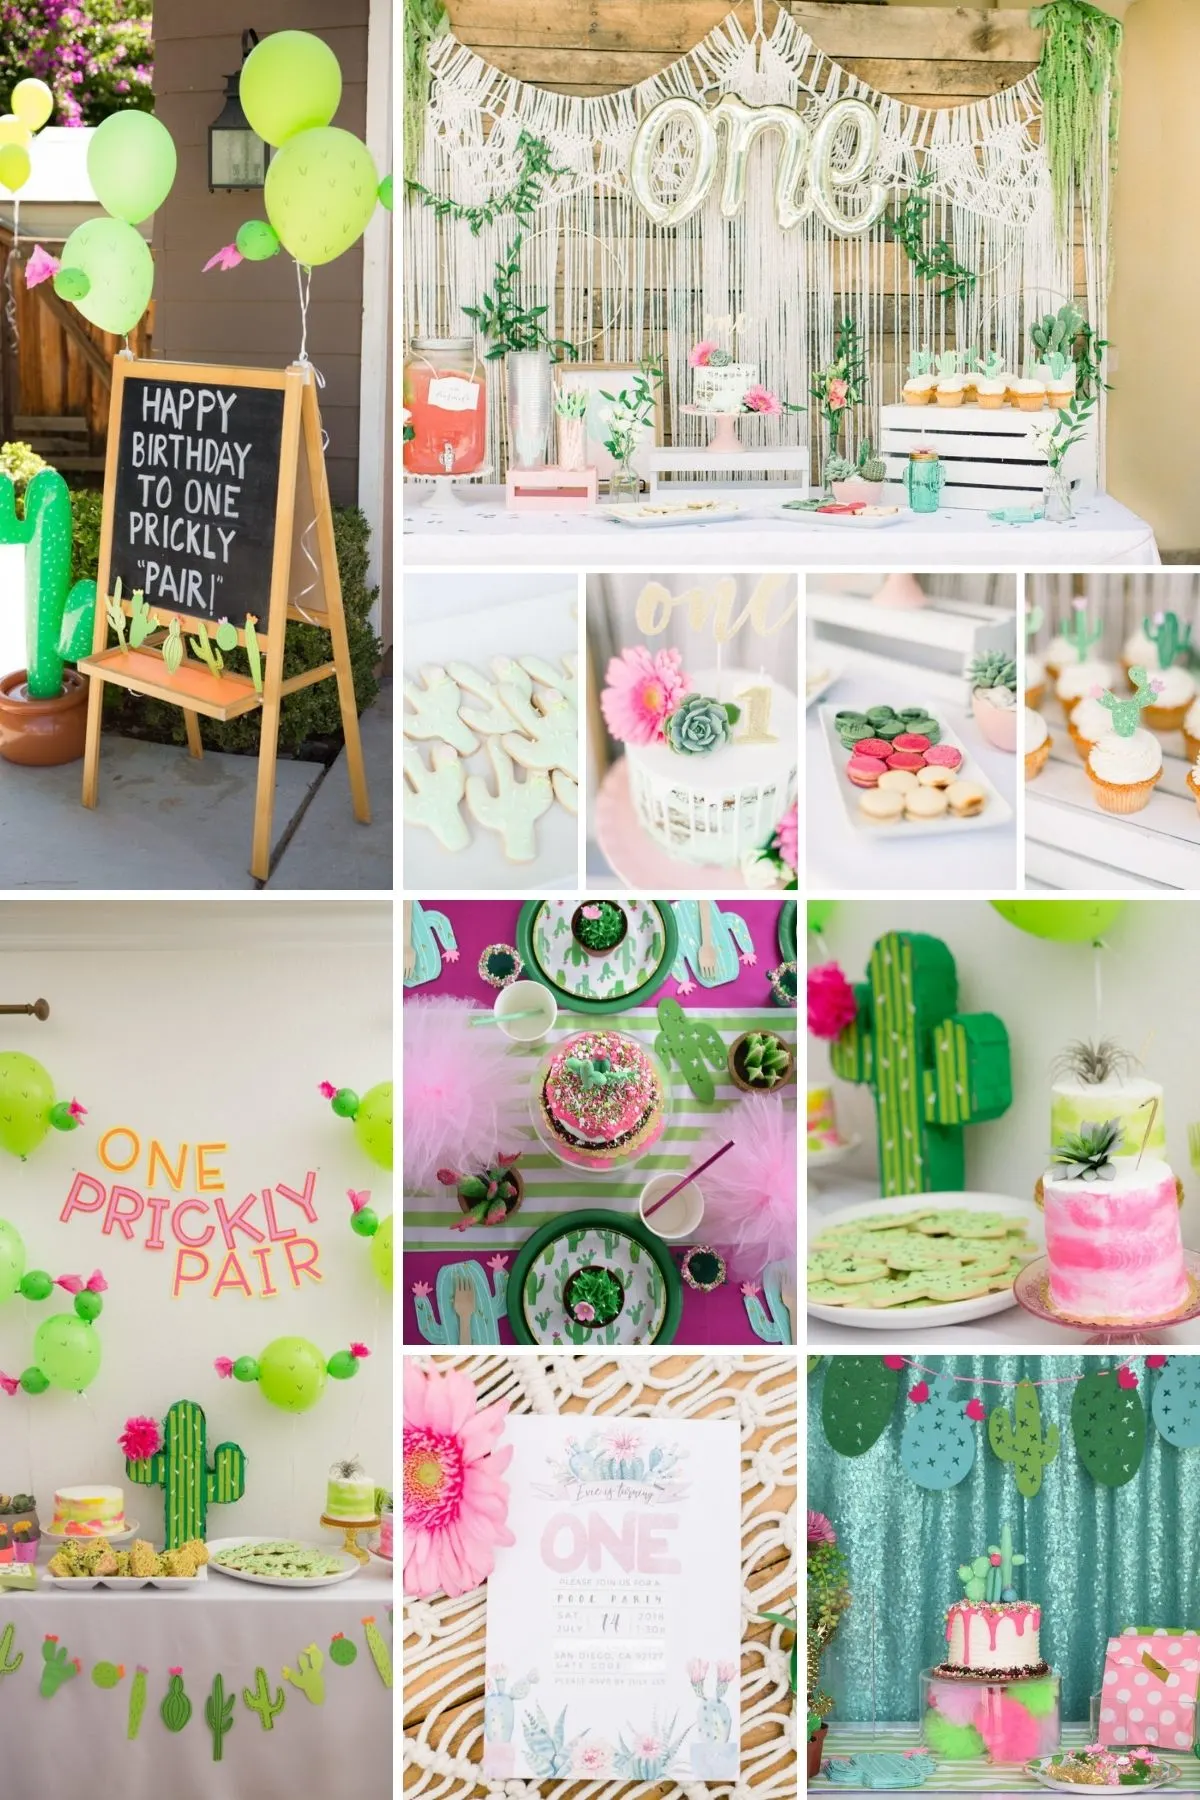 Photo collage for cactus party theme including party signs, balloons, cakes.